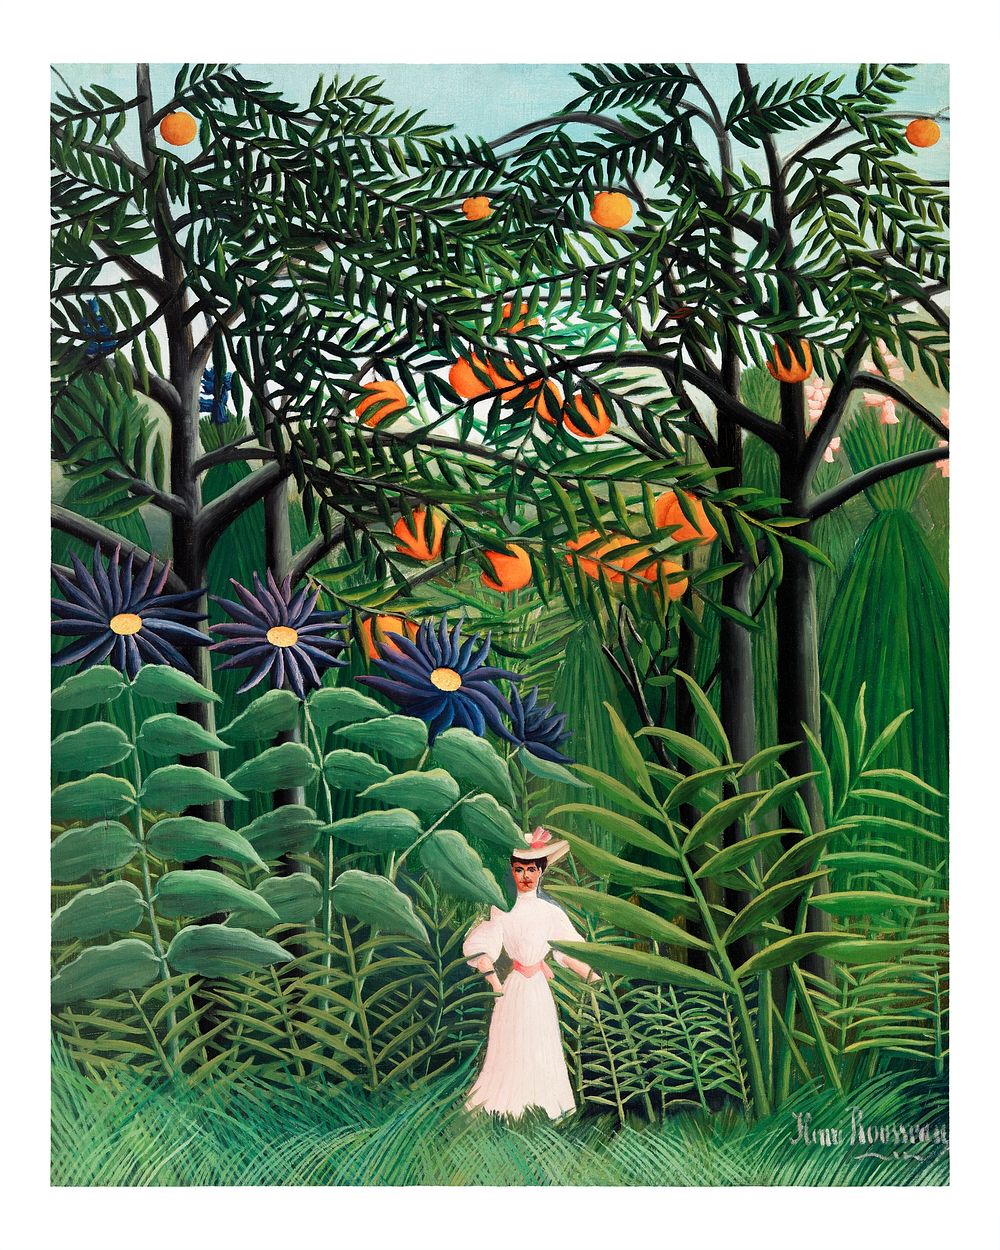 Woman Walking in an Exotic Forest (Femme se promenant dans une for&ecirc;t exotique) (1905) by Henri Rousseau. Original from…